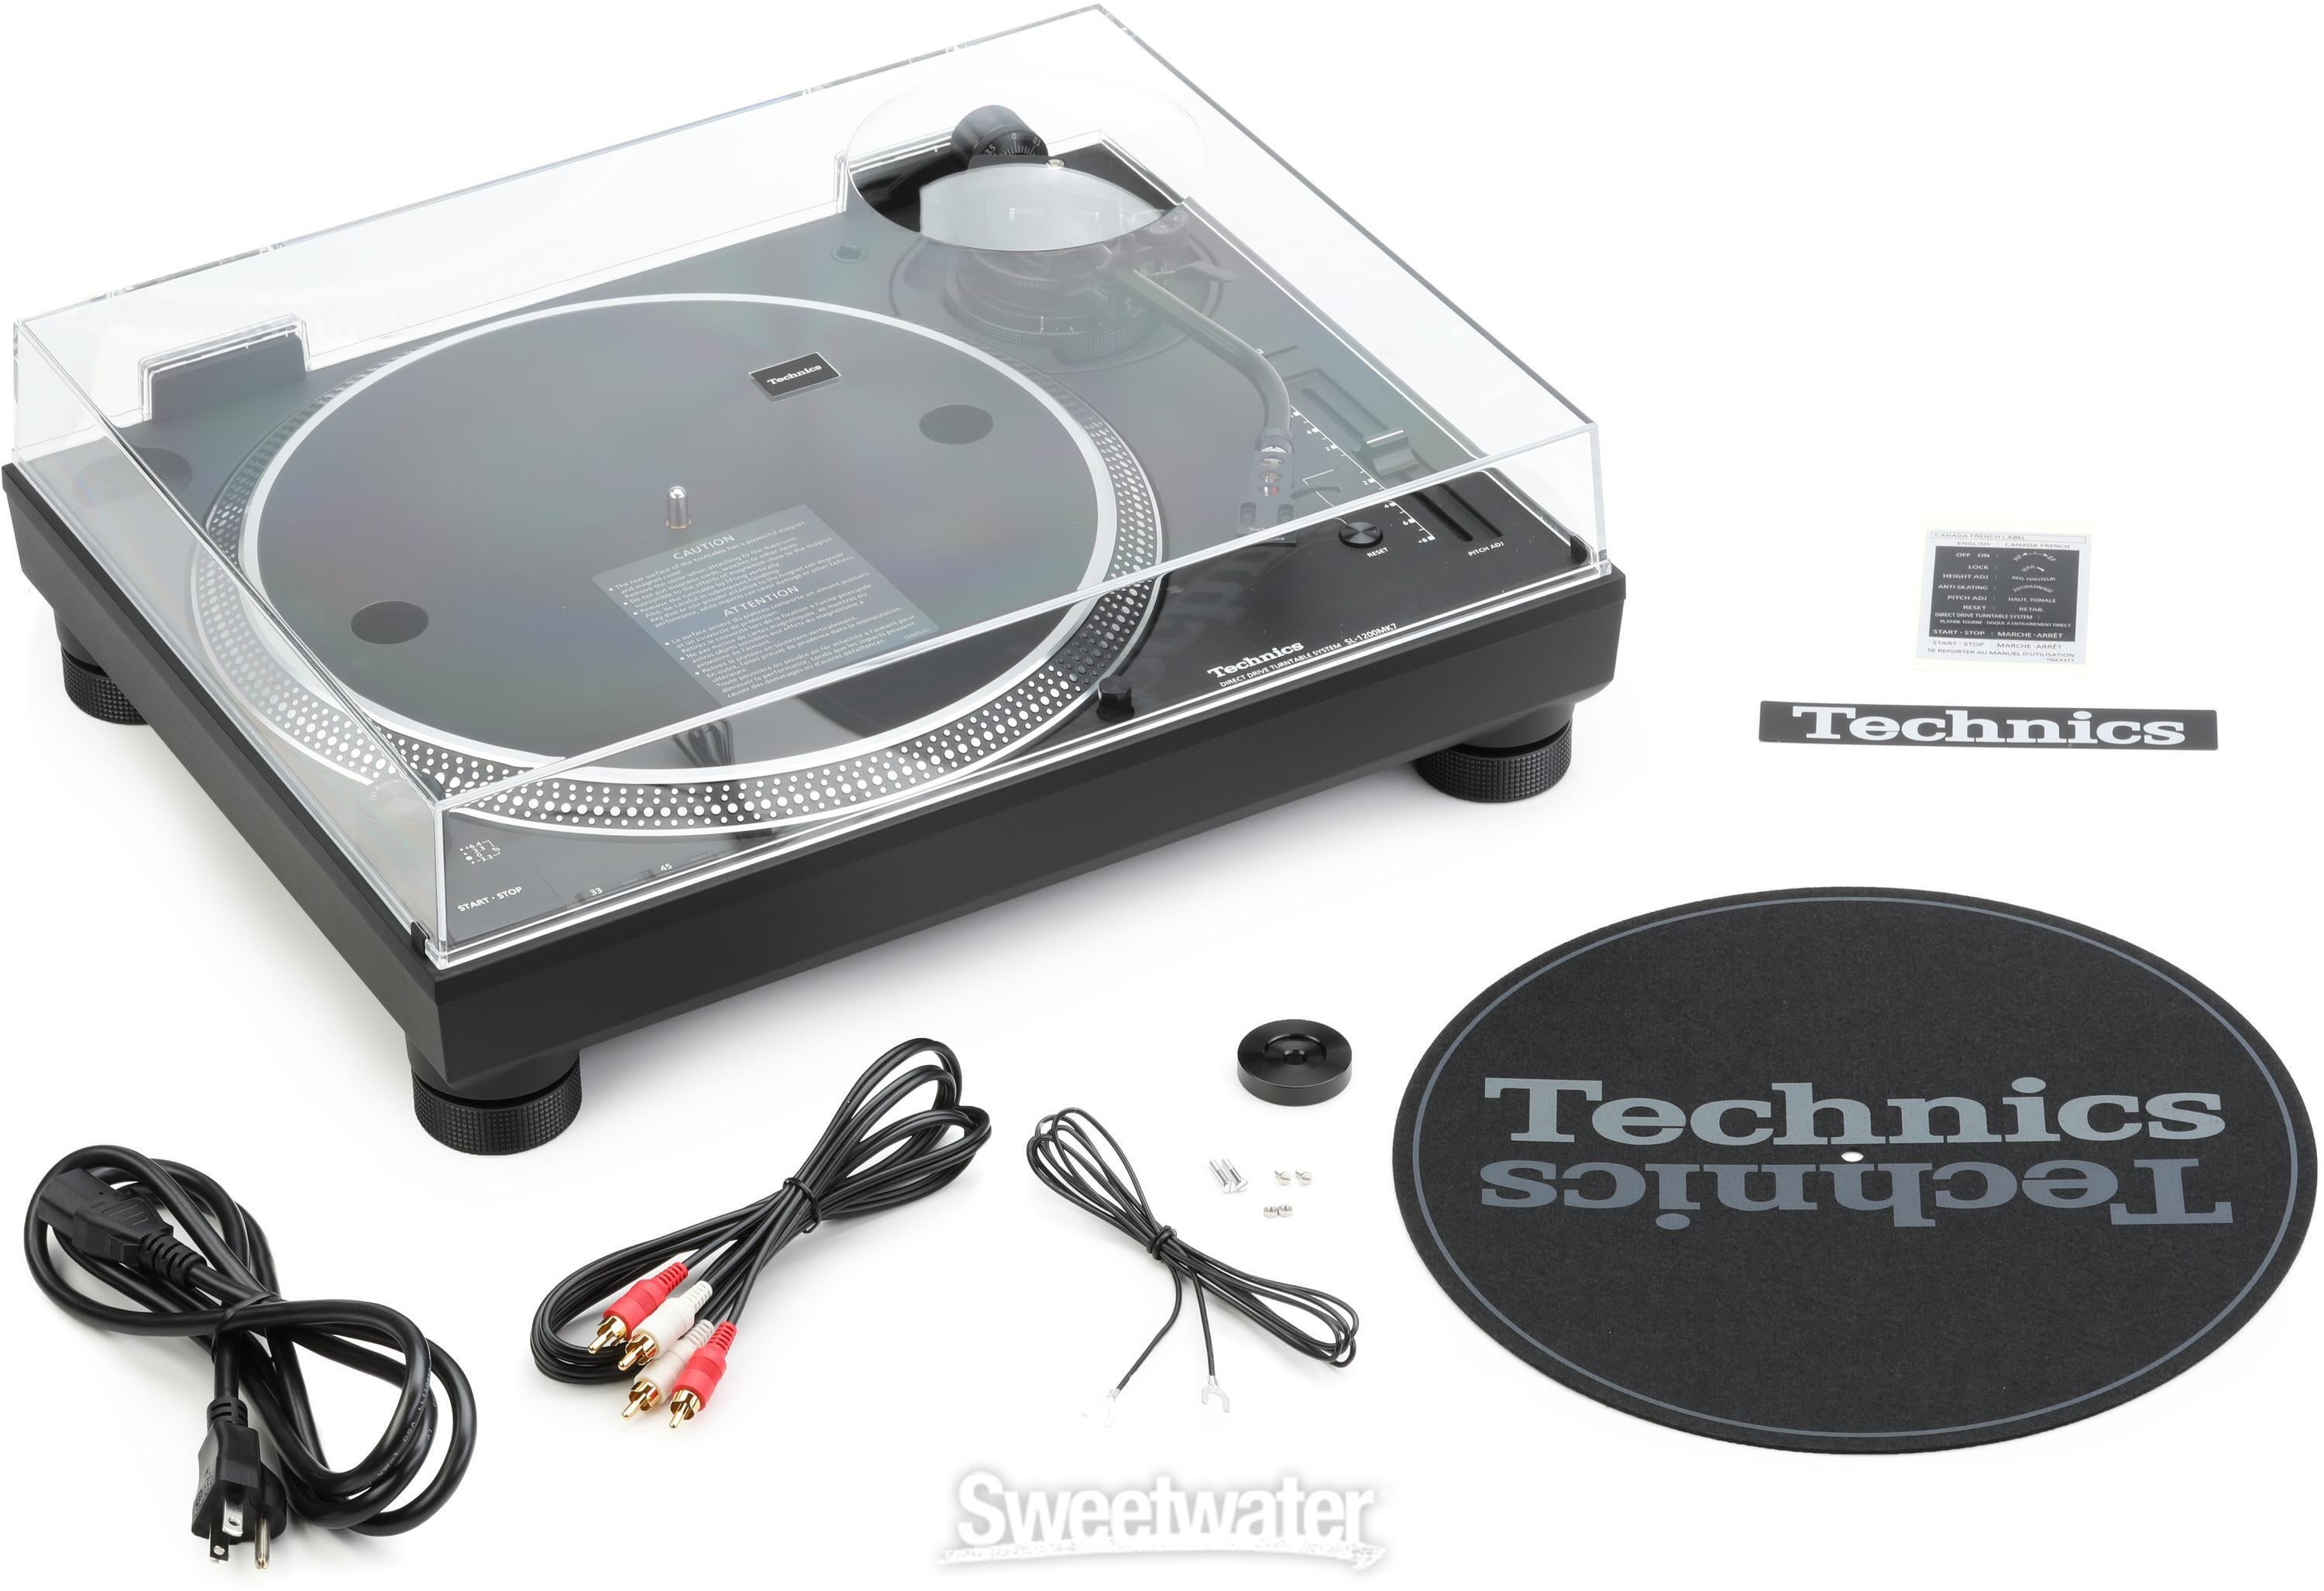 Technics SL-1200MK7 Direct Drive Professional Turntable | Sweetwater